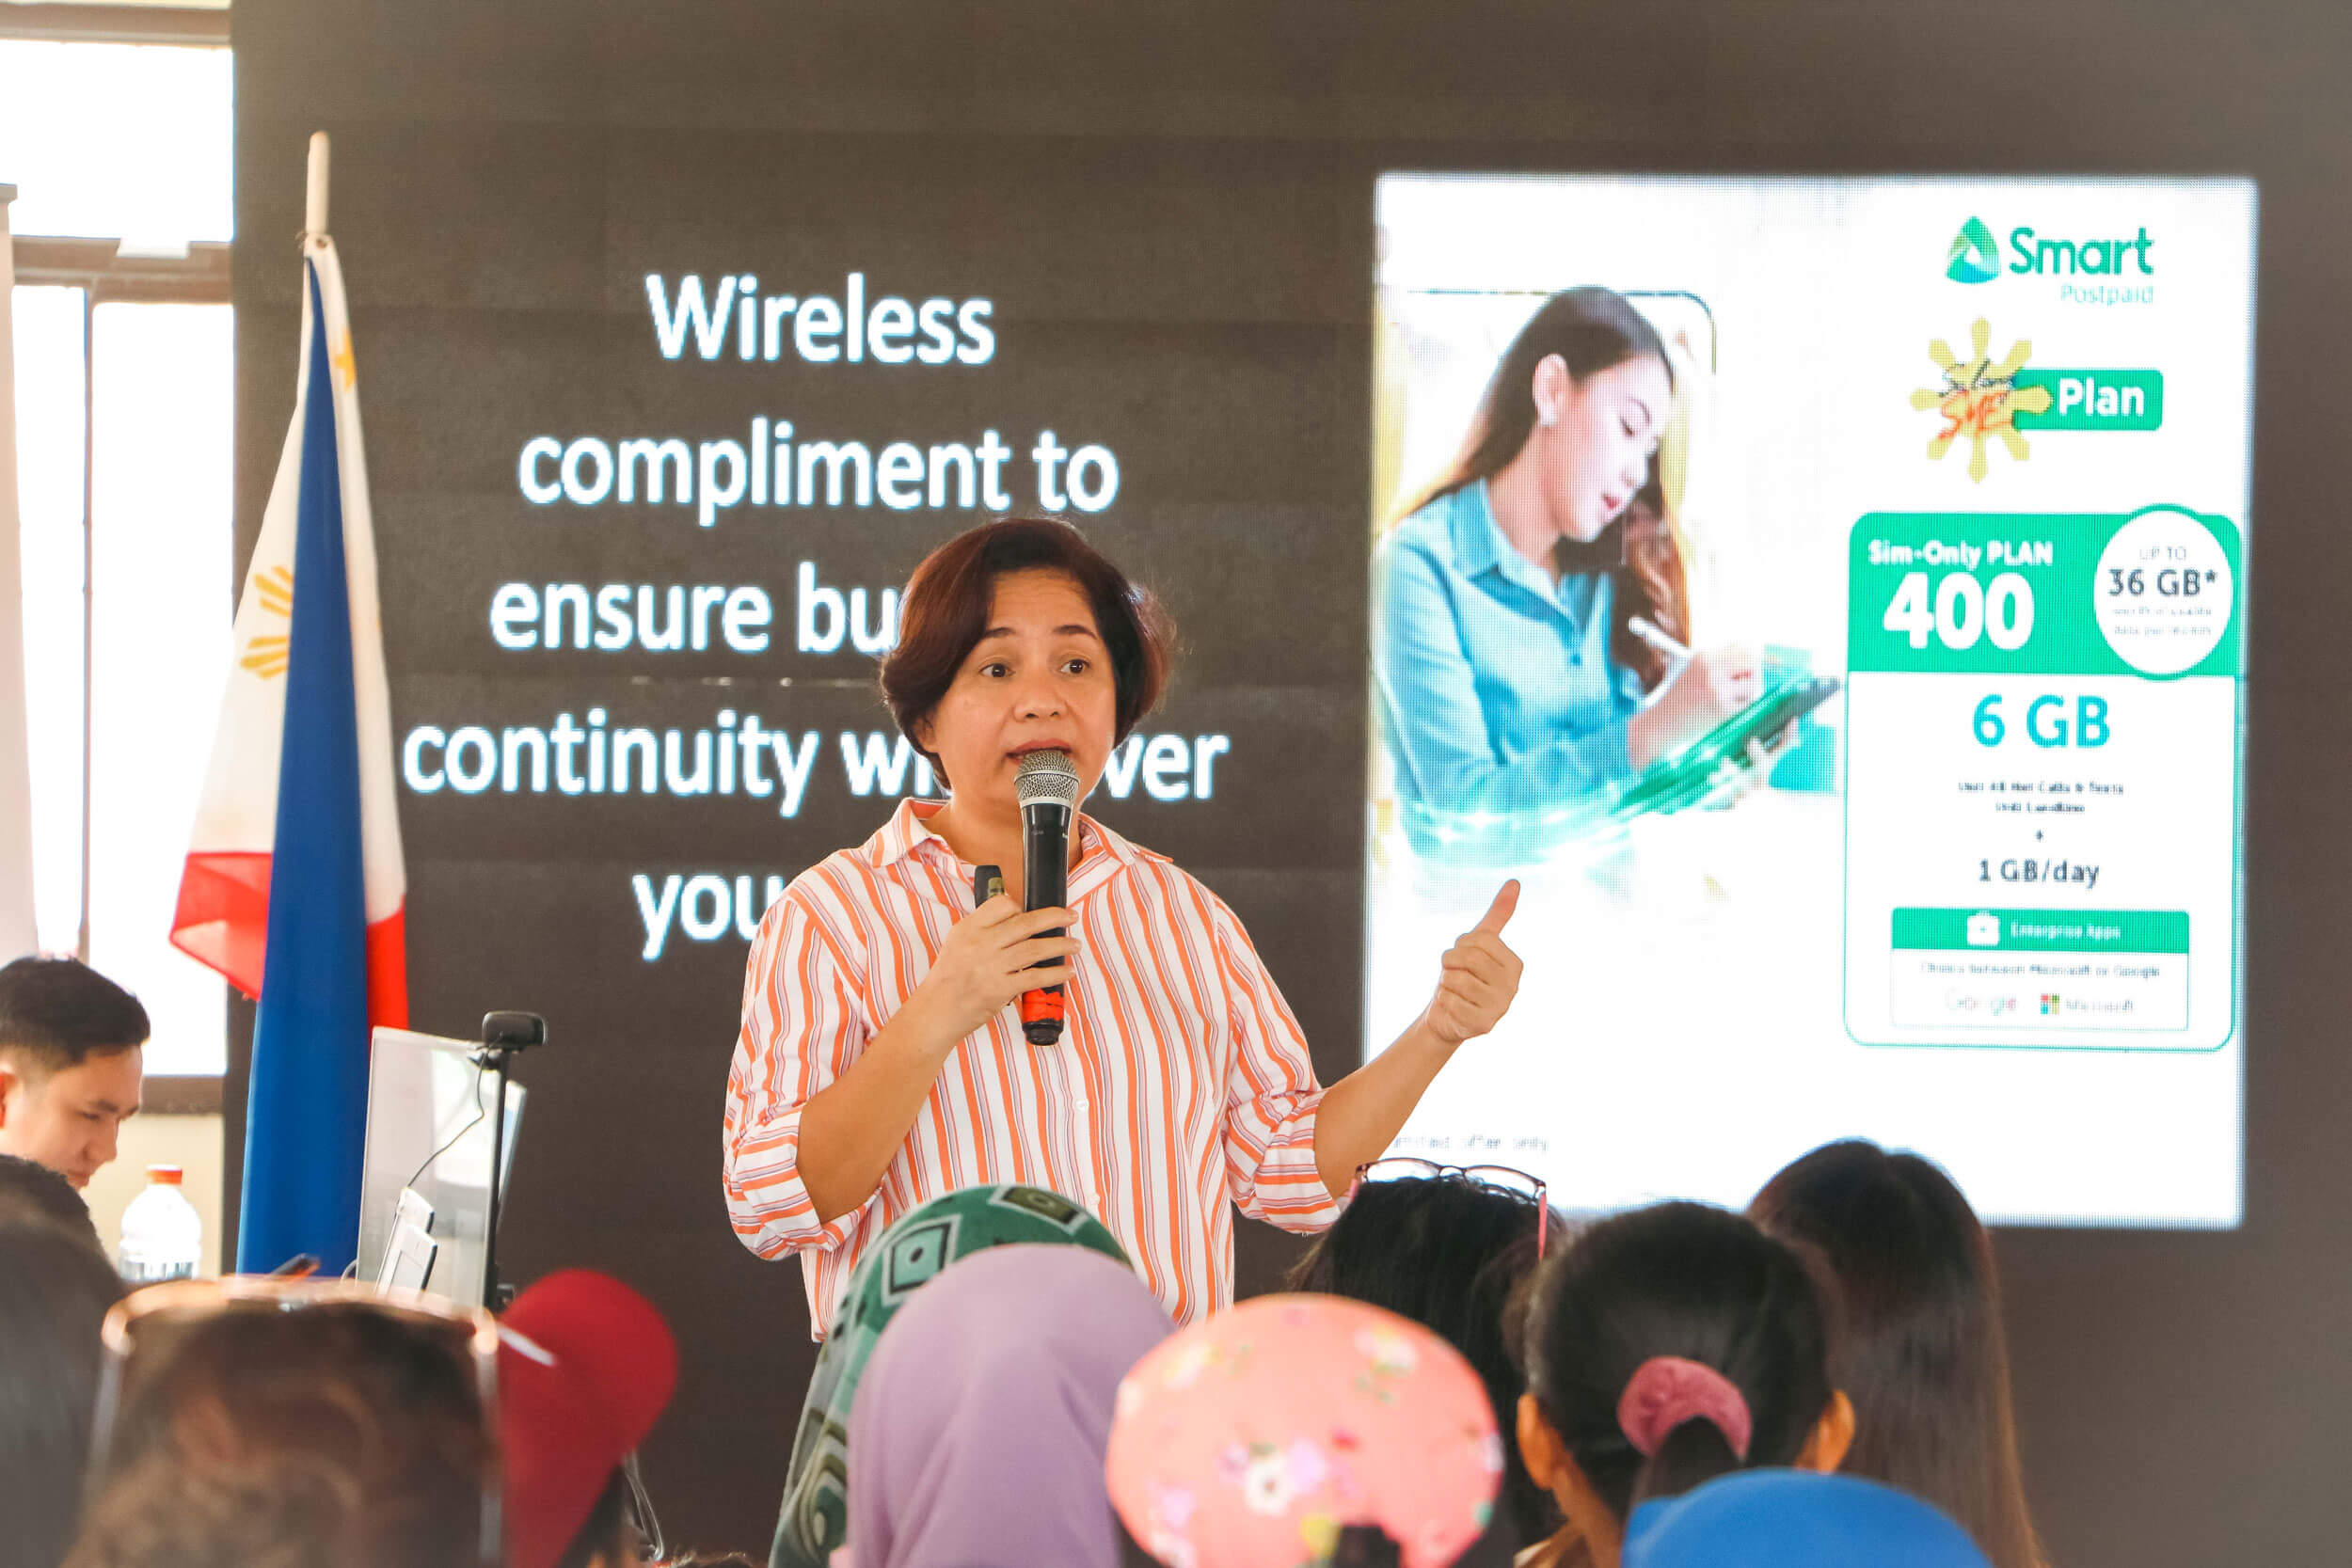 PLDT Enterprise SMBiz Visayas Head Ma. Edna Francisco presented the telco giant’s push to enhance its services and innovate offers to enable growth among MSMEs.